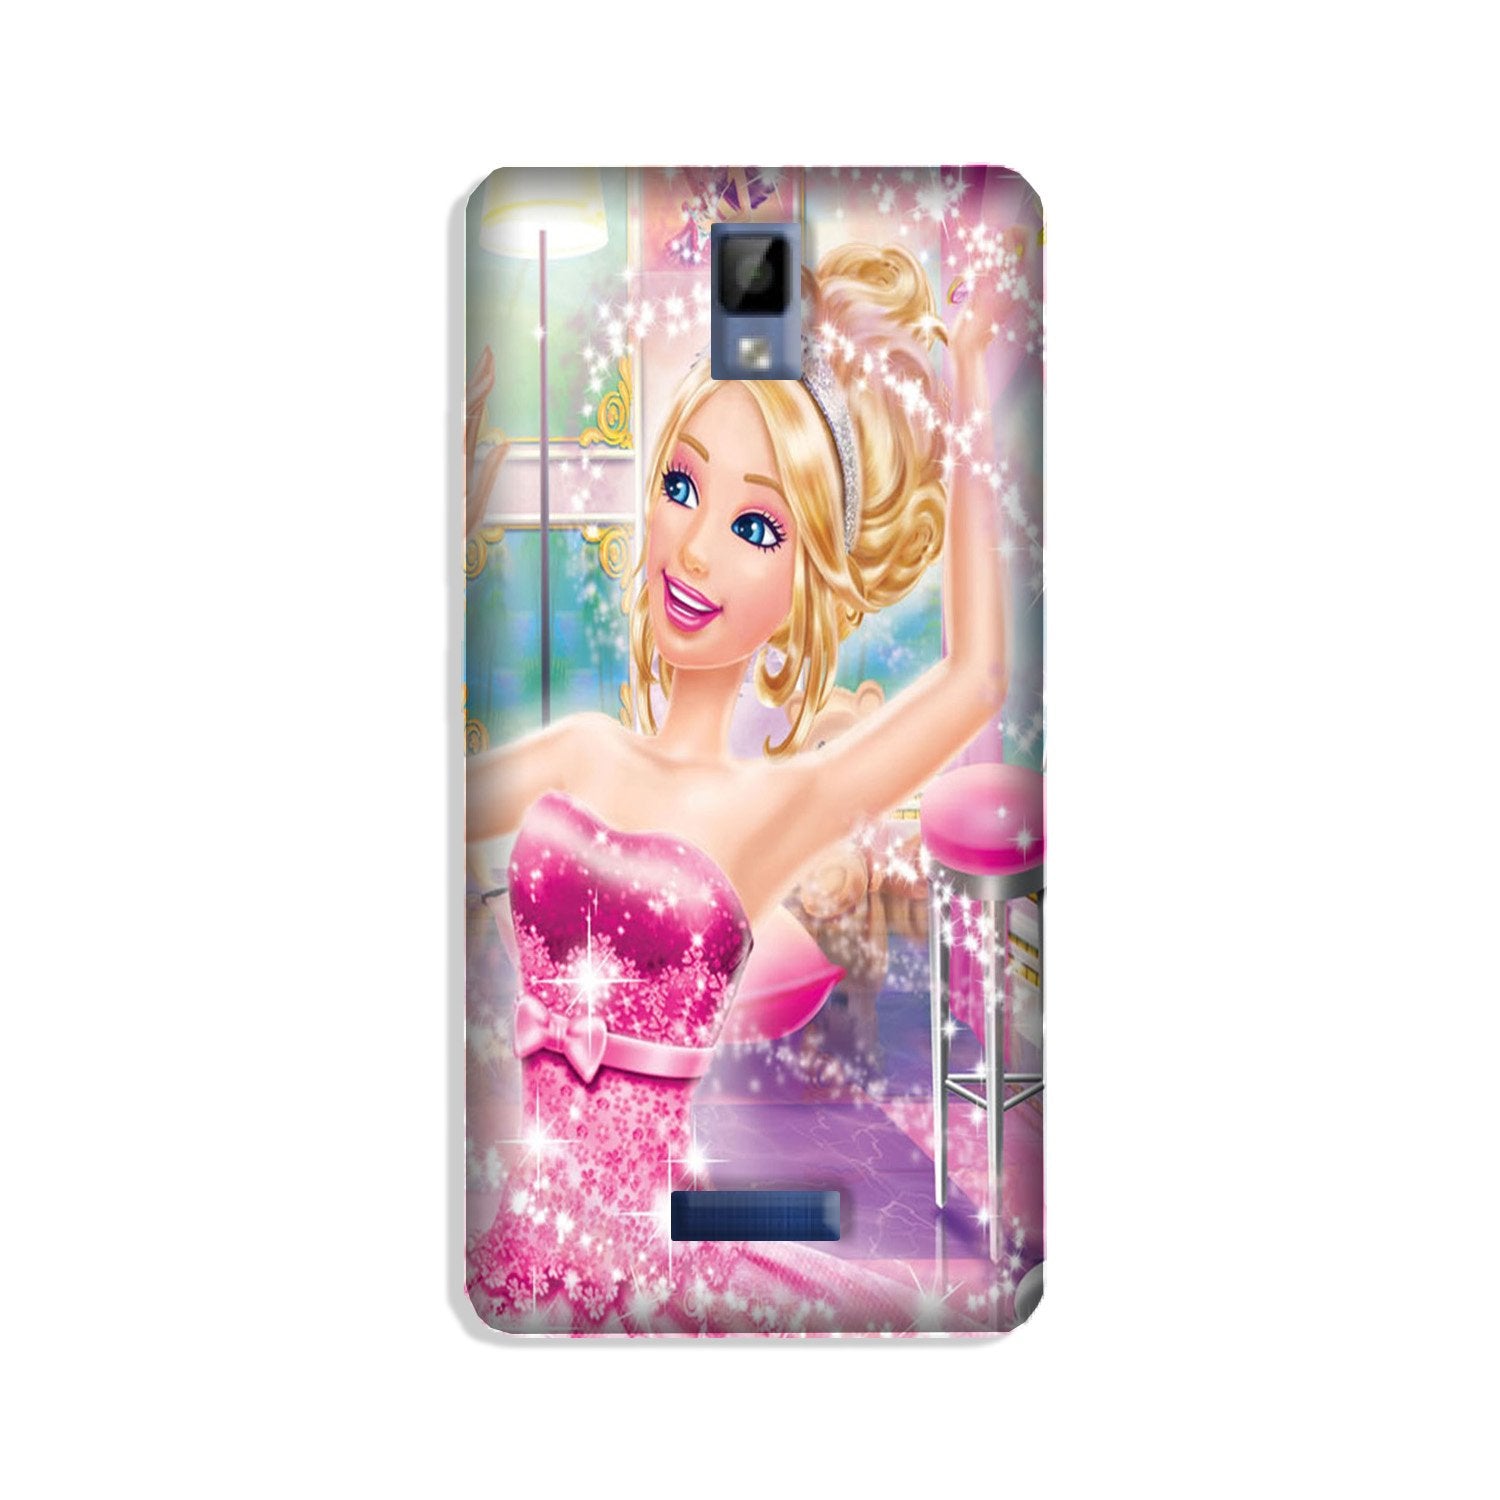 Princesses Case for Gionee P7